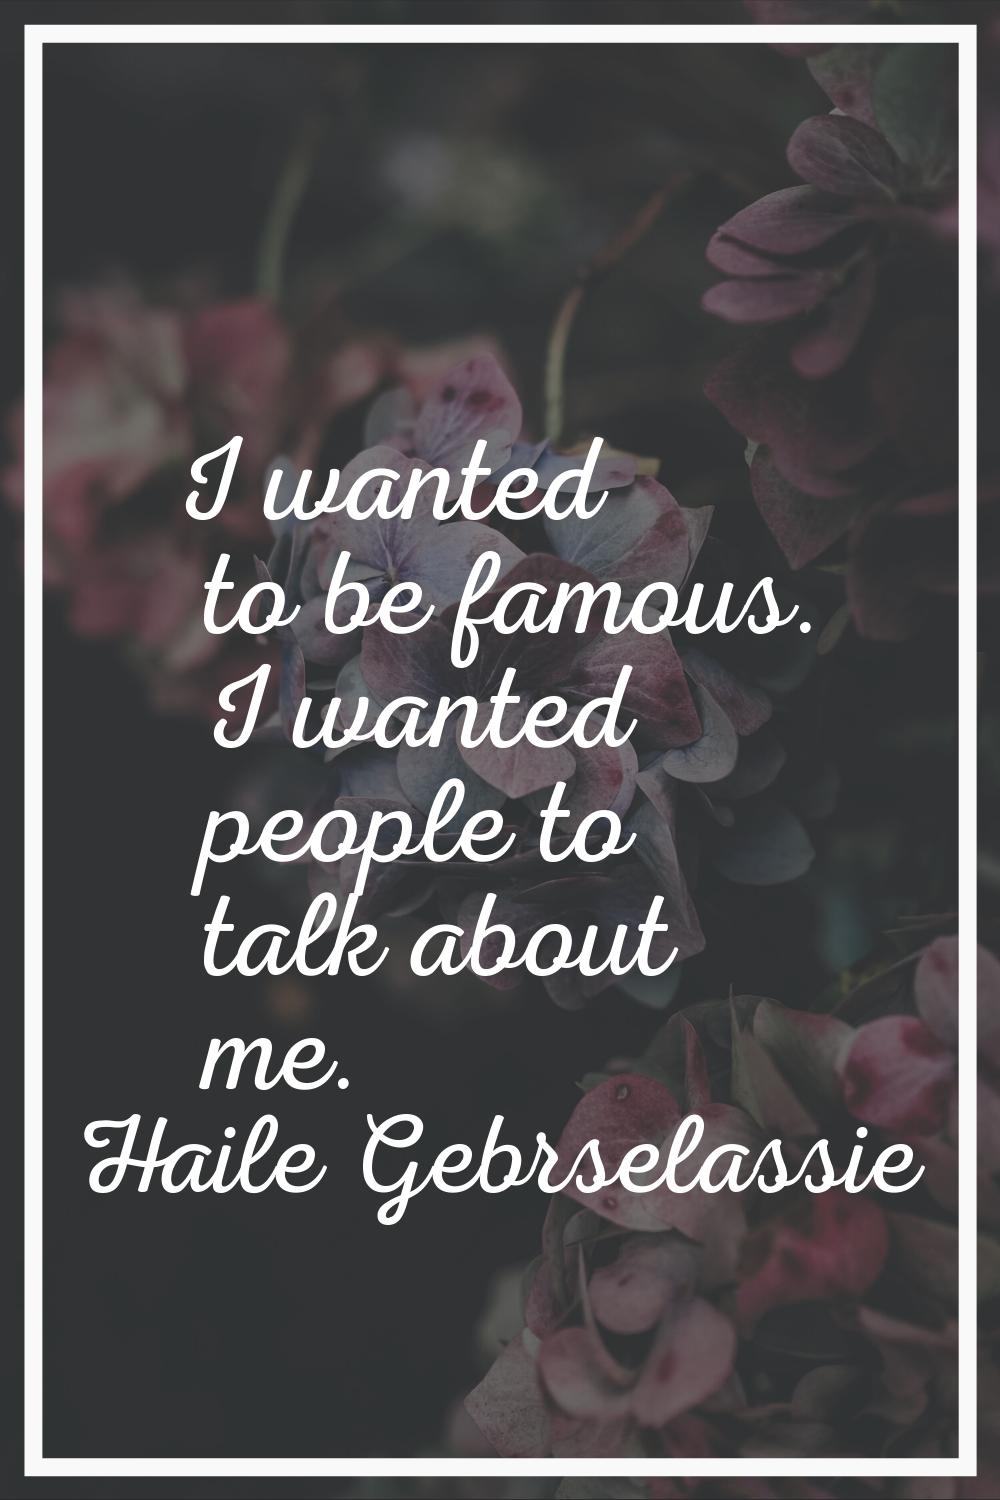 I wanted to be famous. I wanted people to talk about me.